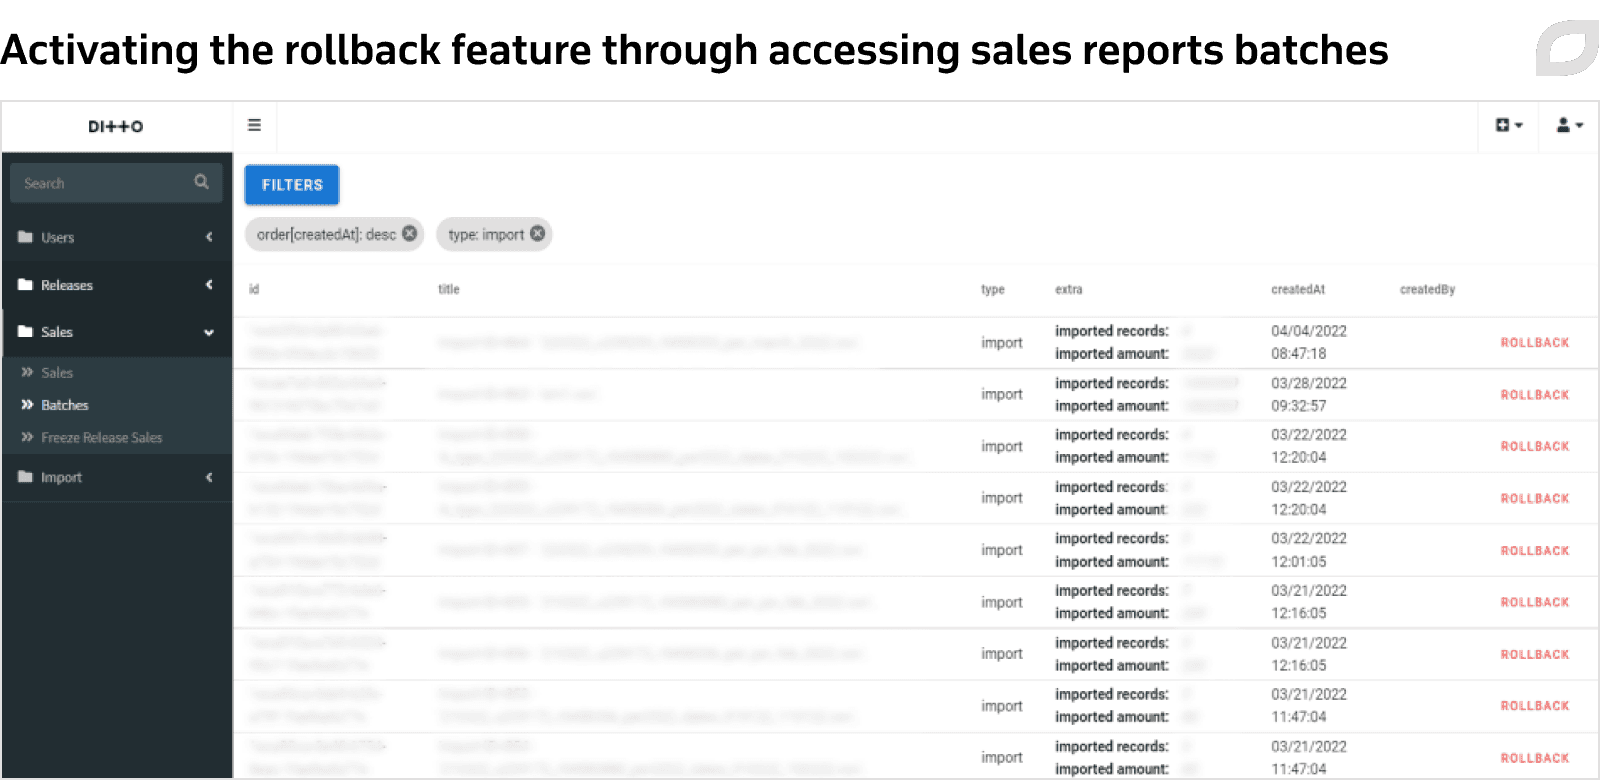 Activating the rollback feature through accessing sales reports batches